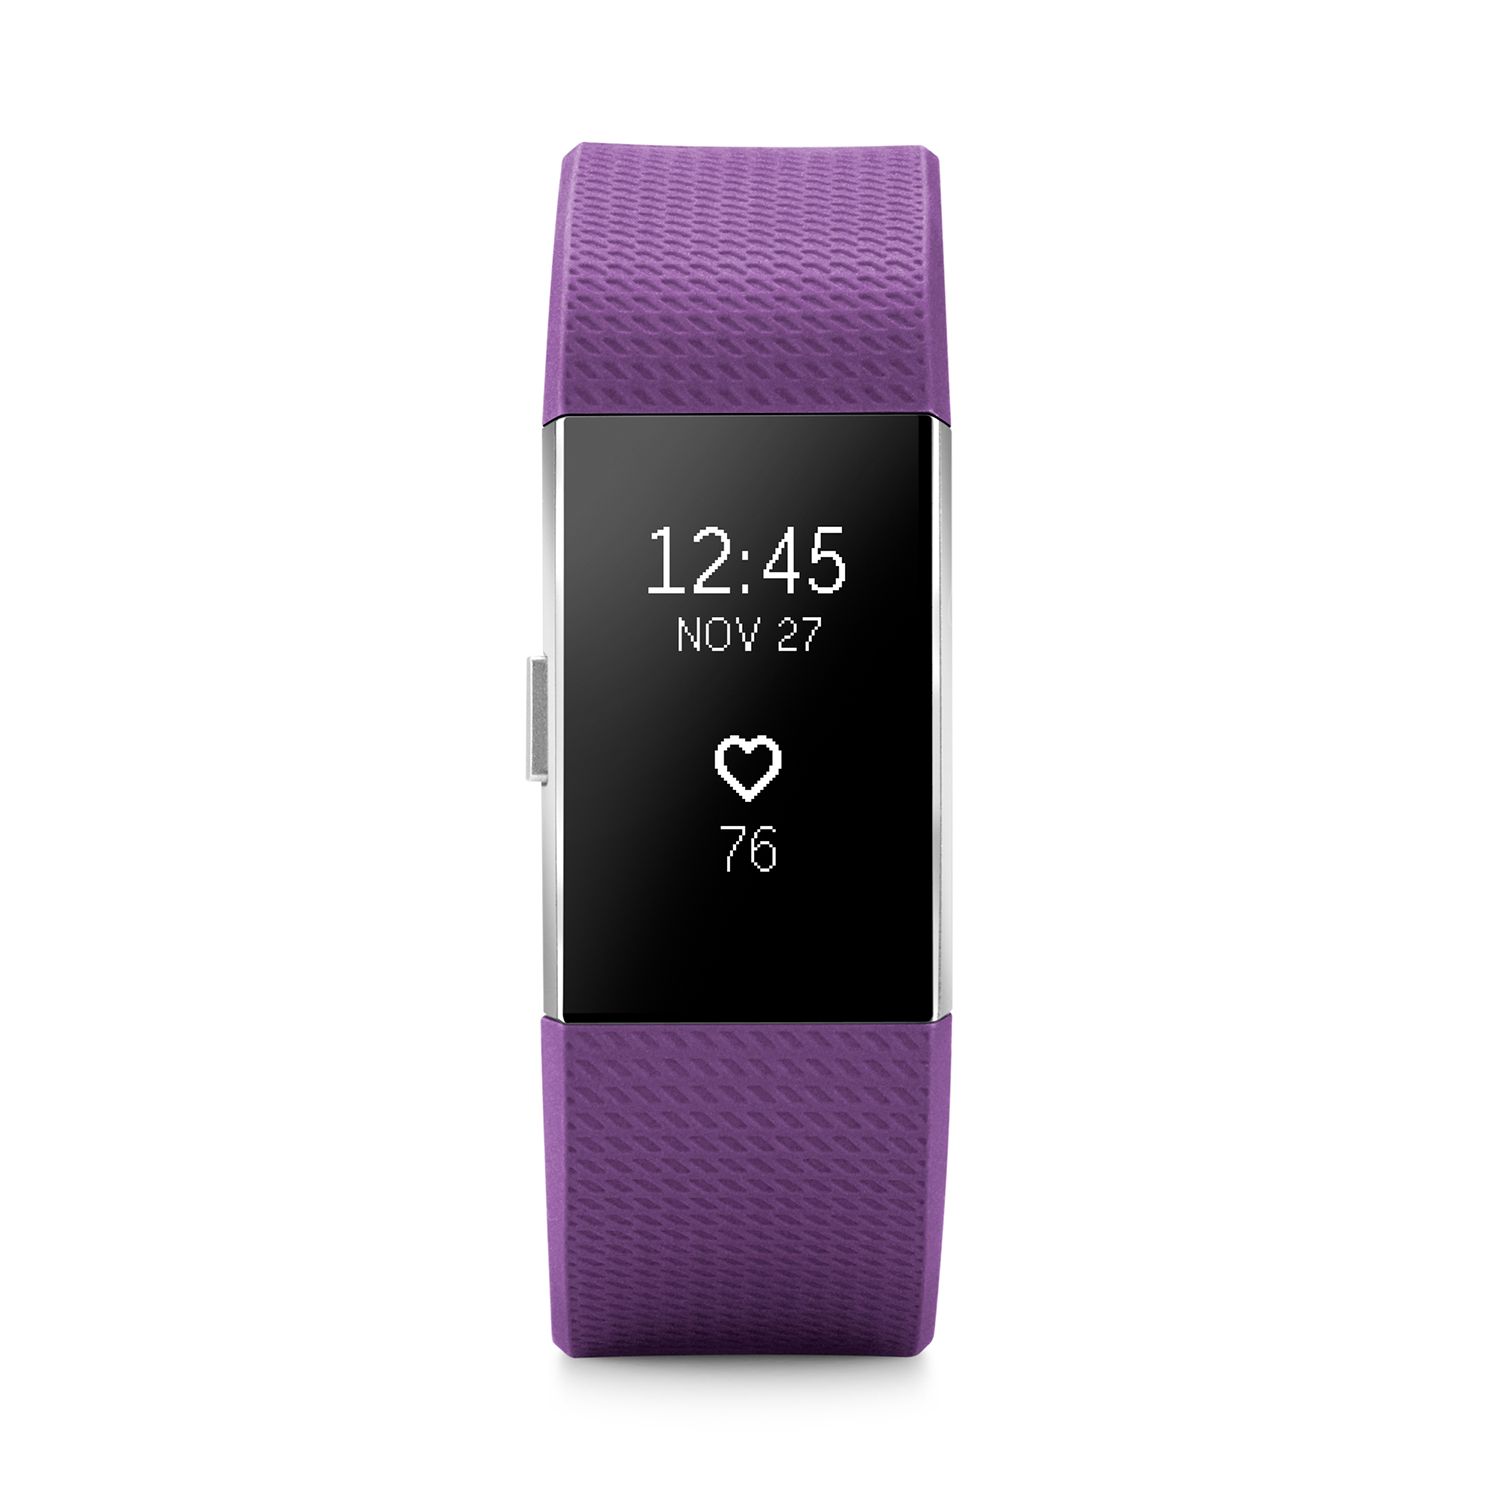 the fitbit charge 2